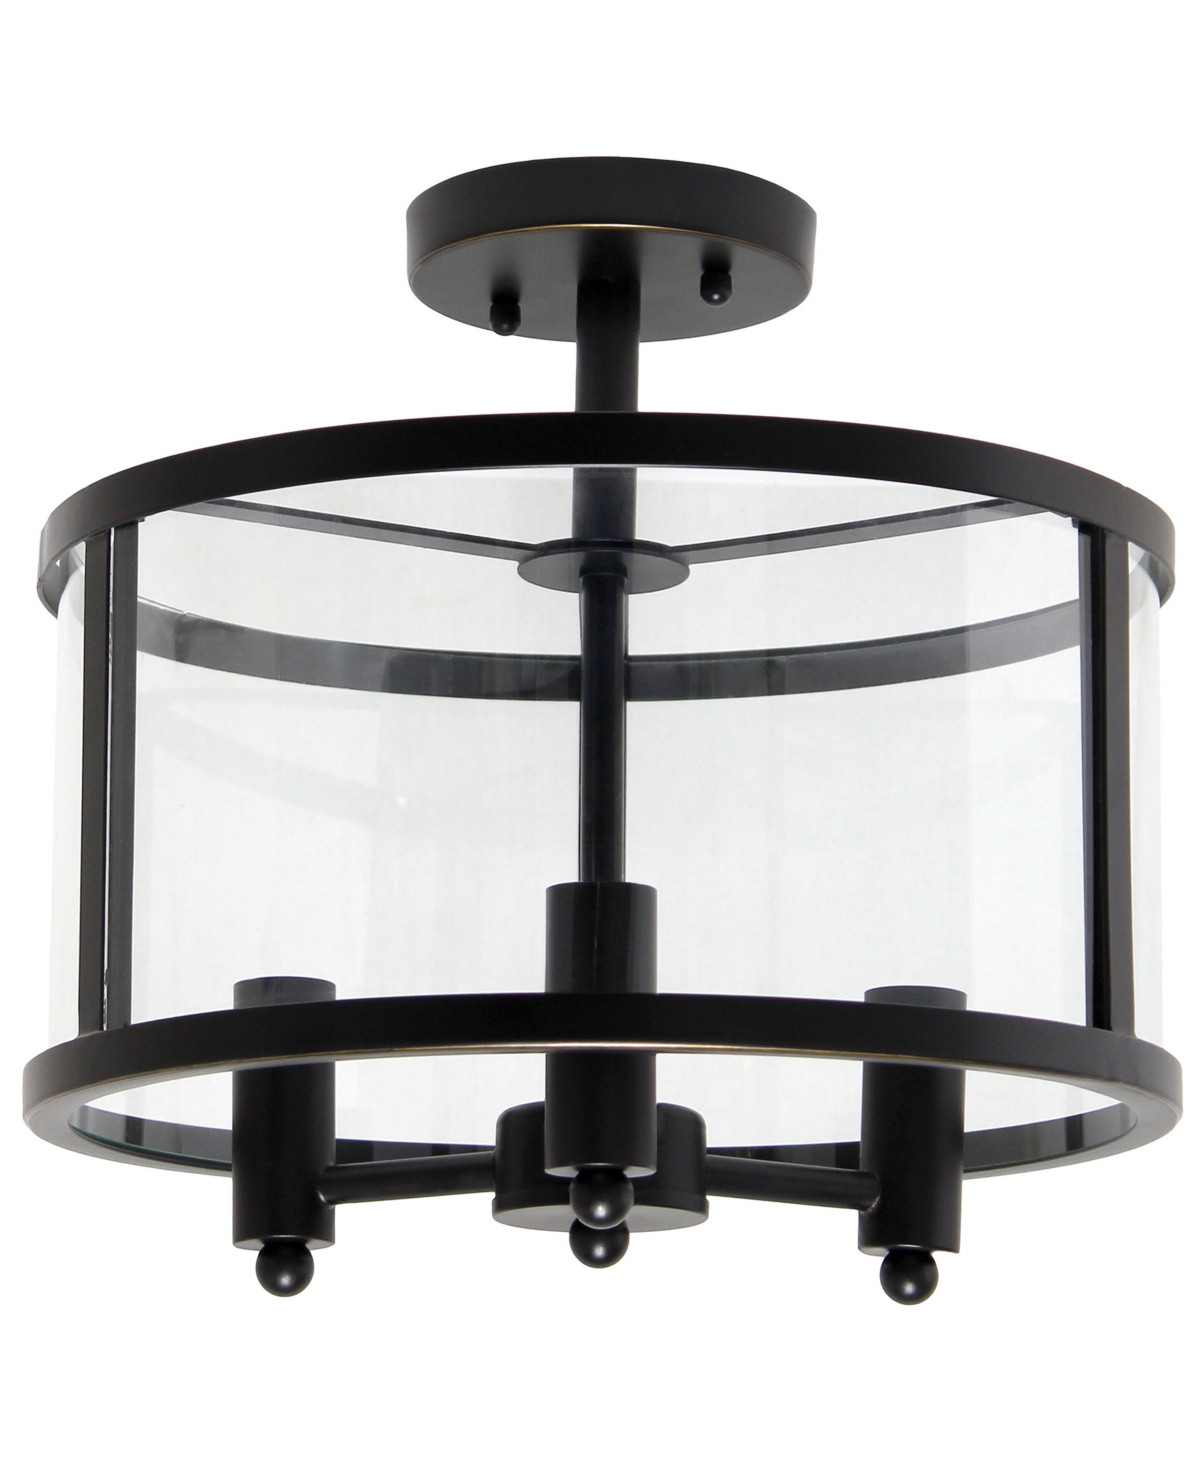 All The Rages 3-light 13" Industrial Farmhouse Glass And Metallic Accented Semi-flush Mount In Black